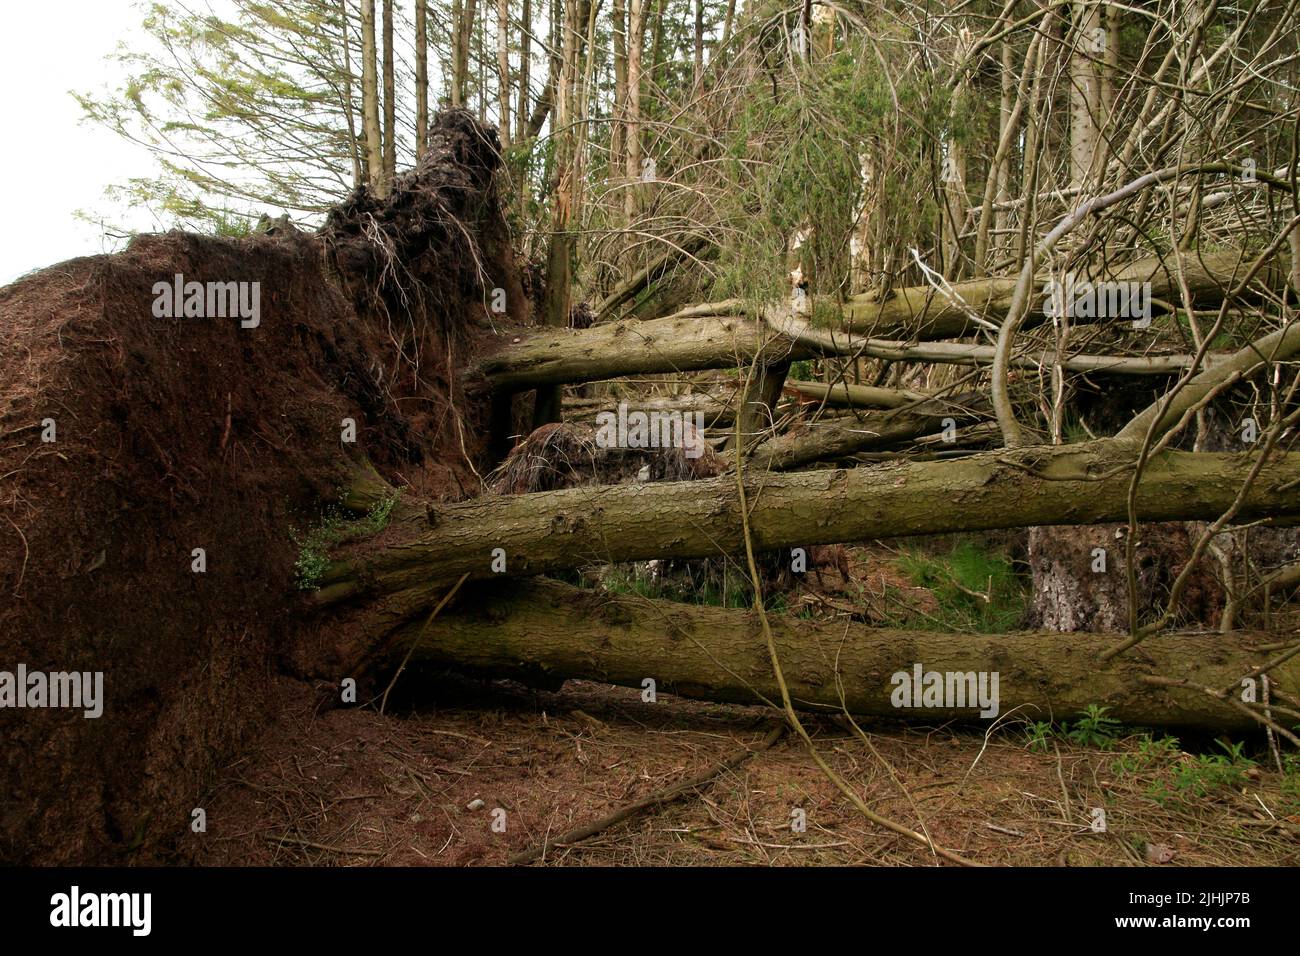 Uprooted trees from Storm Arwen, along Crooked Road just outside Beattock, Dumfries & Galloway, Scotland, UK Stock Photo